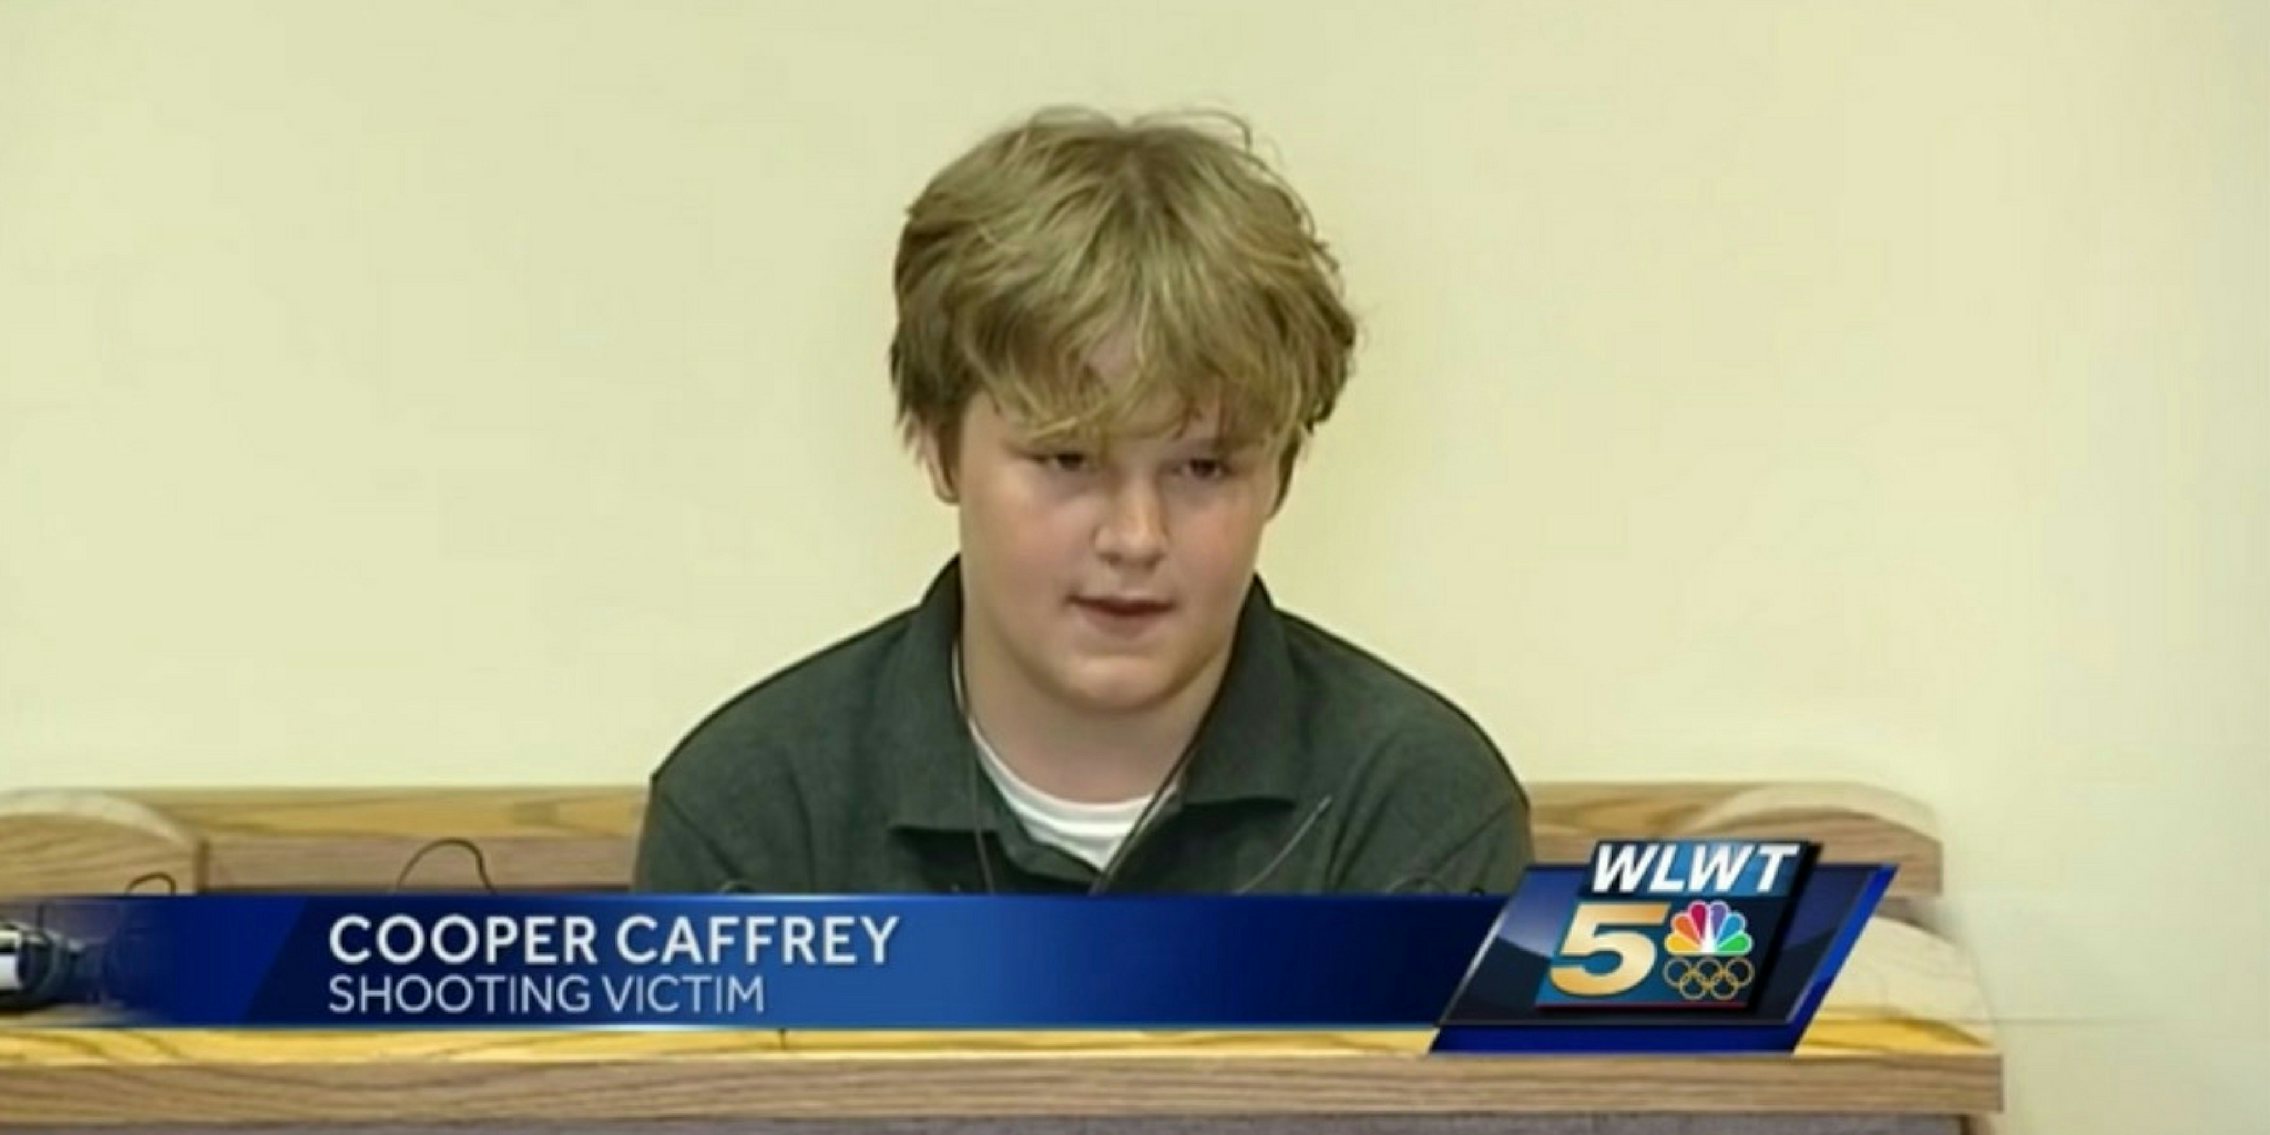 Ohio student Cooper Caffrey gives testimony at the sentencing of the boy who shot him during a school shooting.